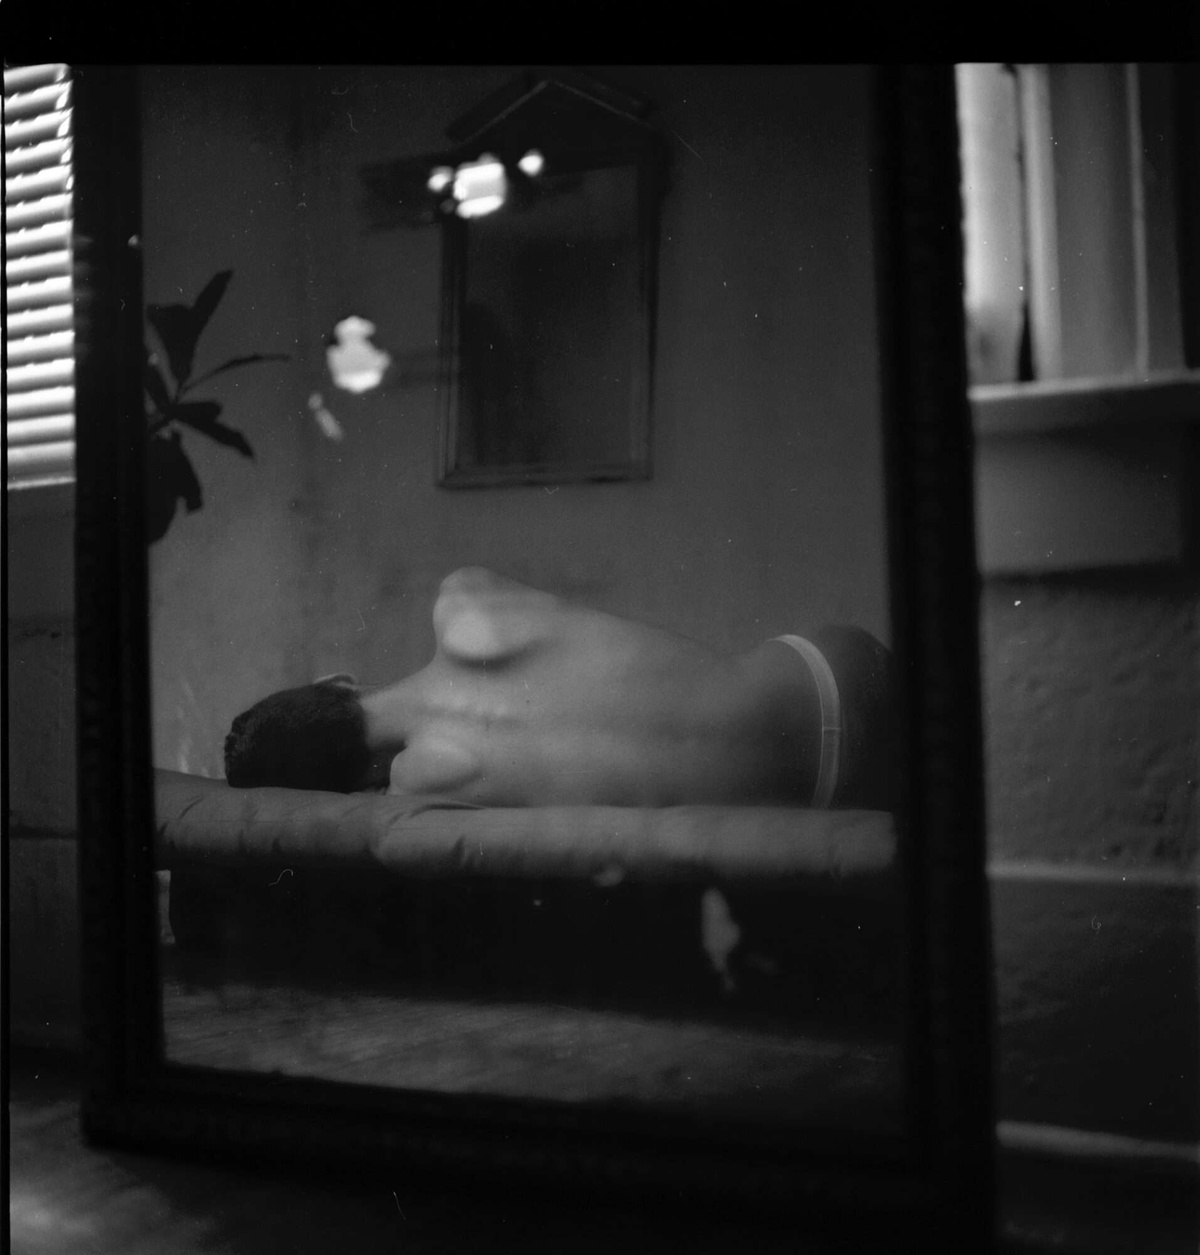 The arching scapula of a person laying on a bed is reflected in a mirror in a black and white photo by Reynaldo Rivera.